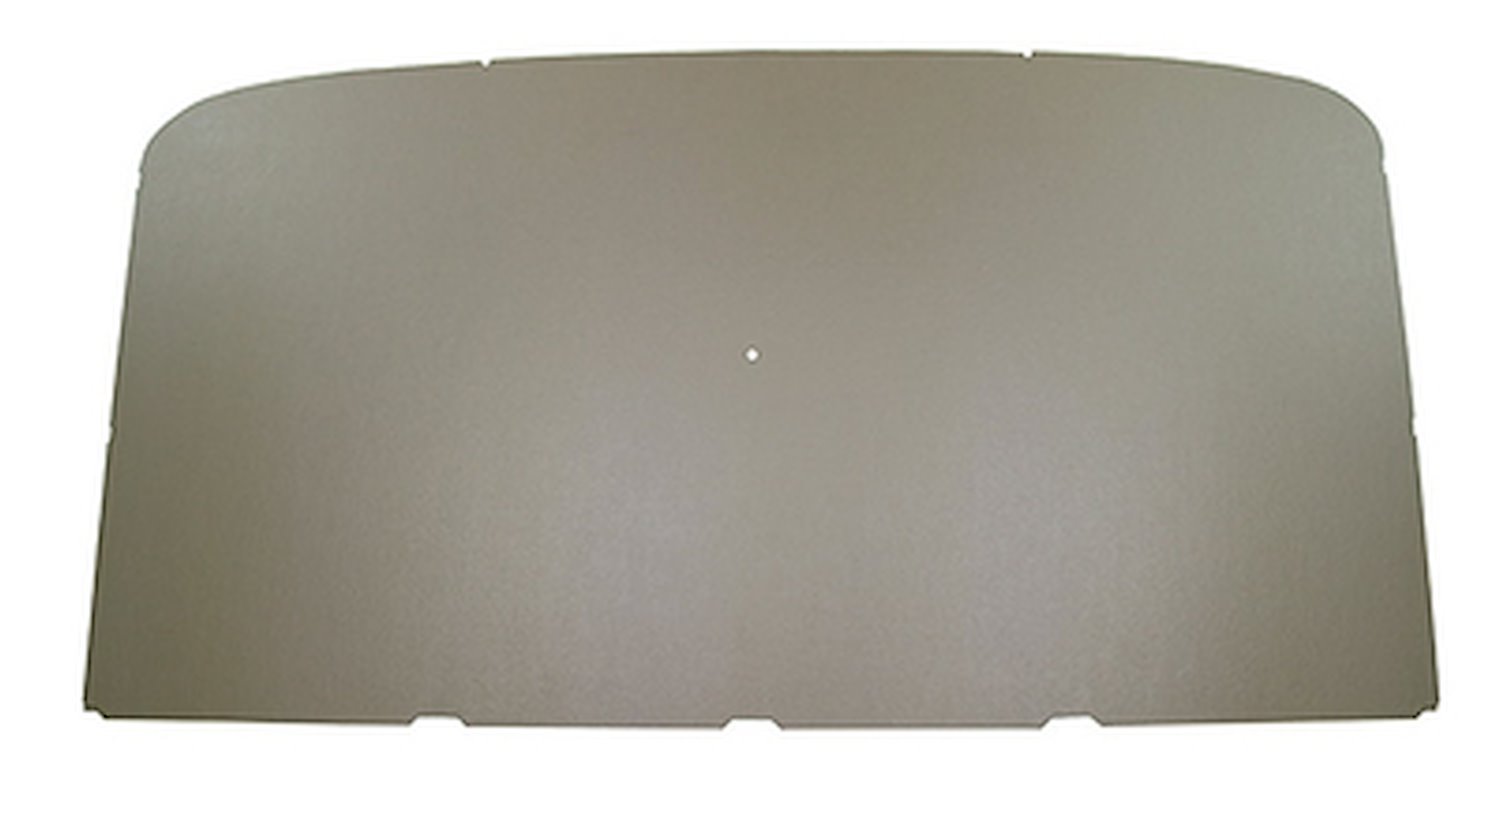 FT156 Truck Headliner for 1973-1979 Ford F-100/F-250 - Pearl Beige